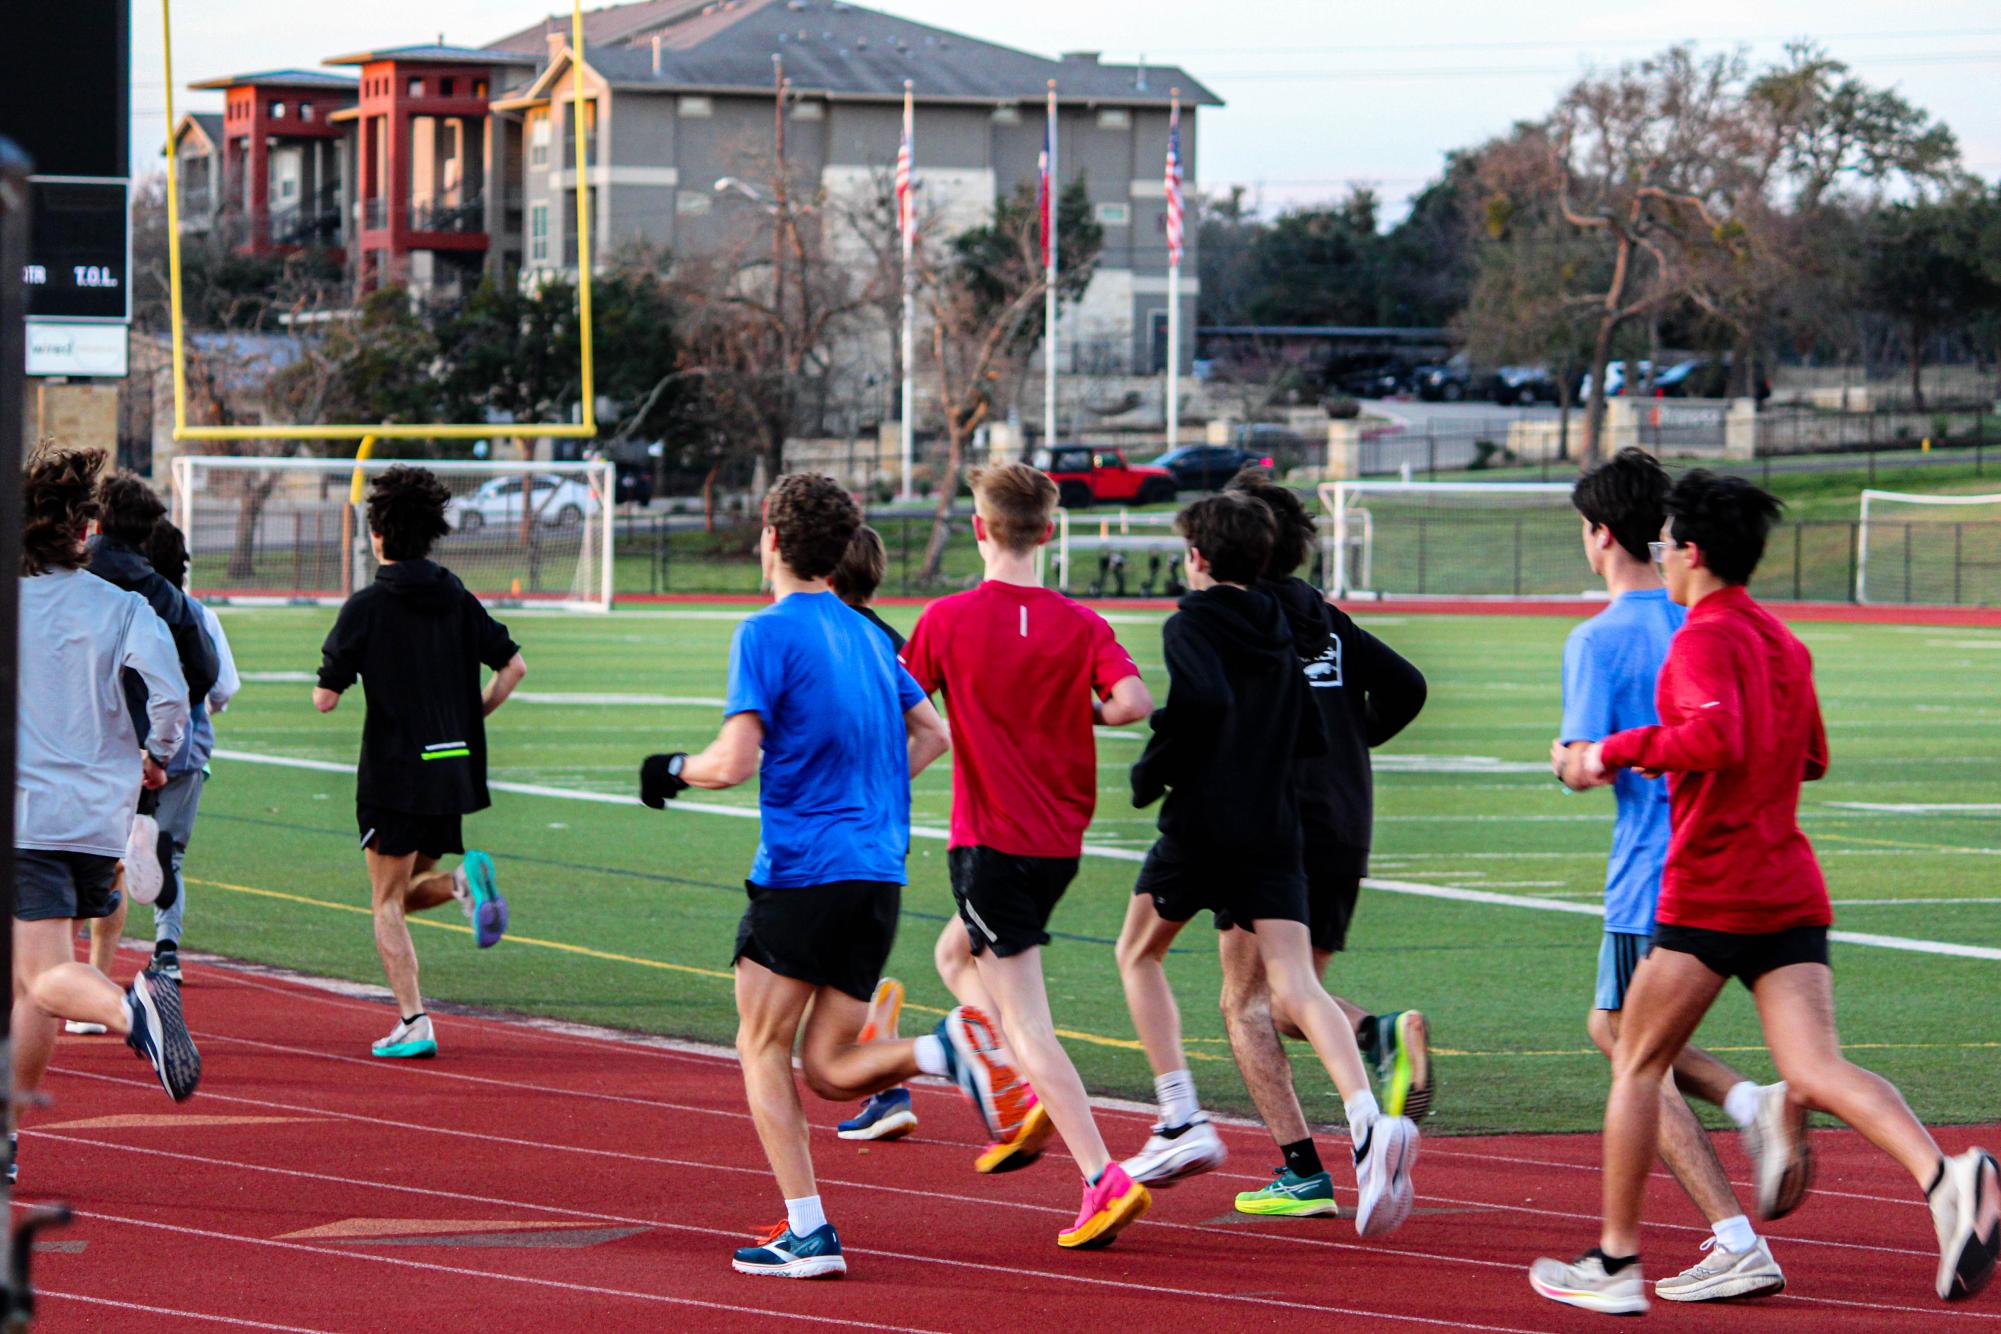 Dedication Shines: Cross Country Team’s Early Morning Group Runs